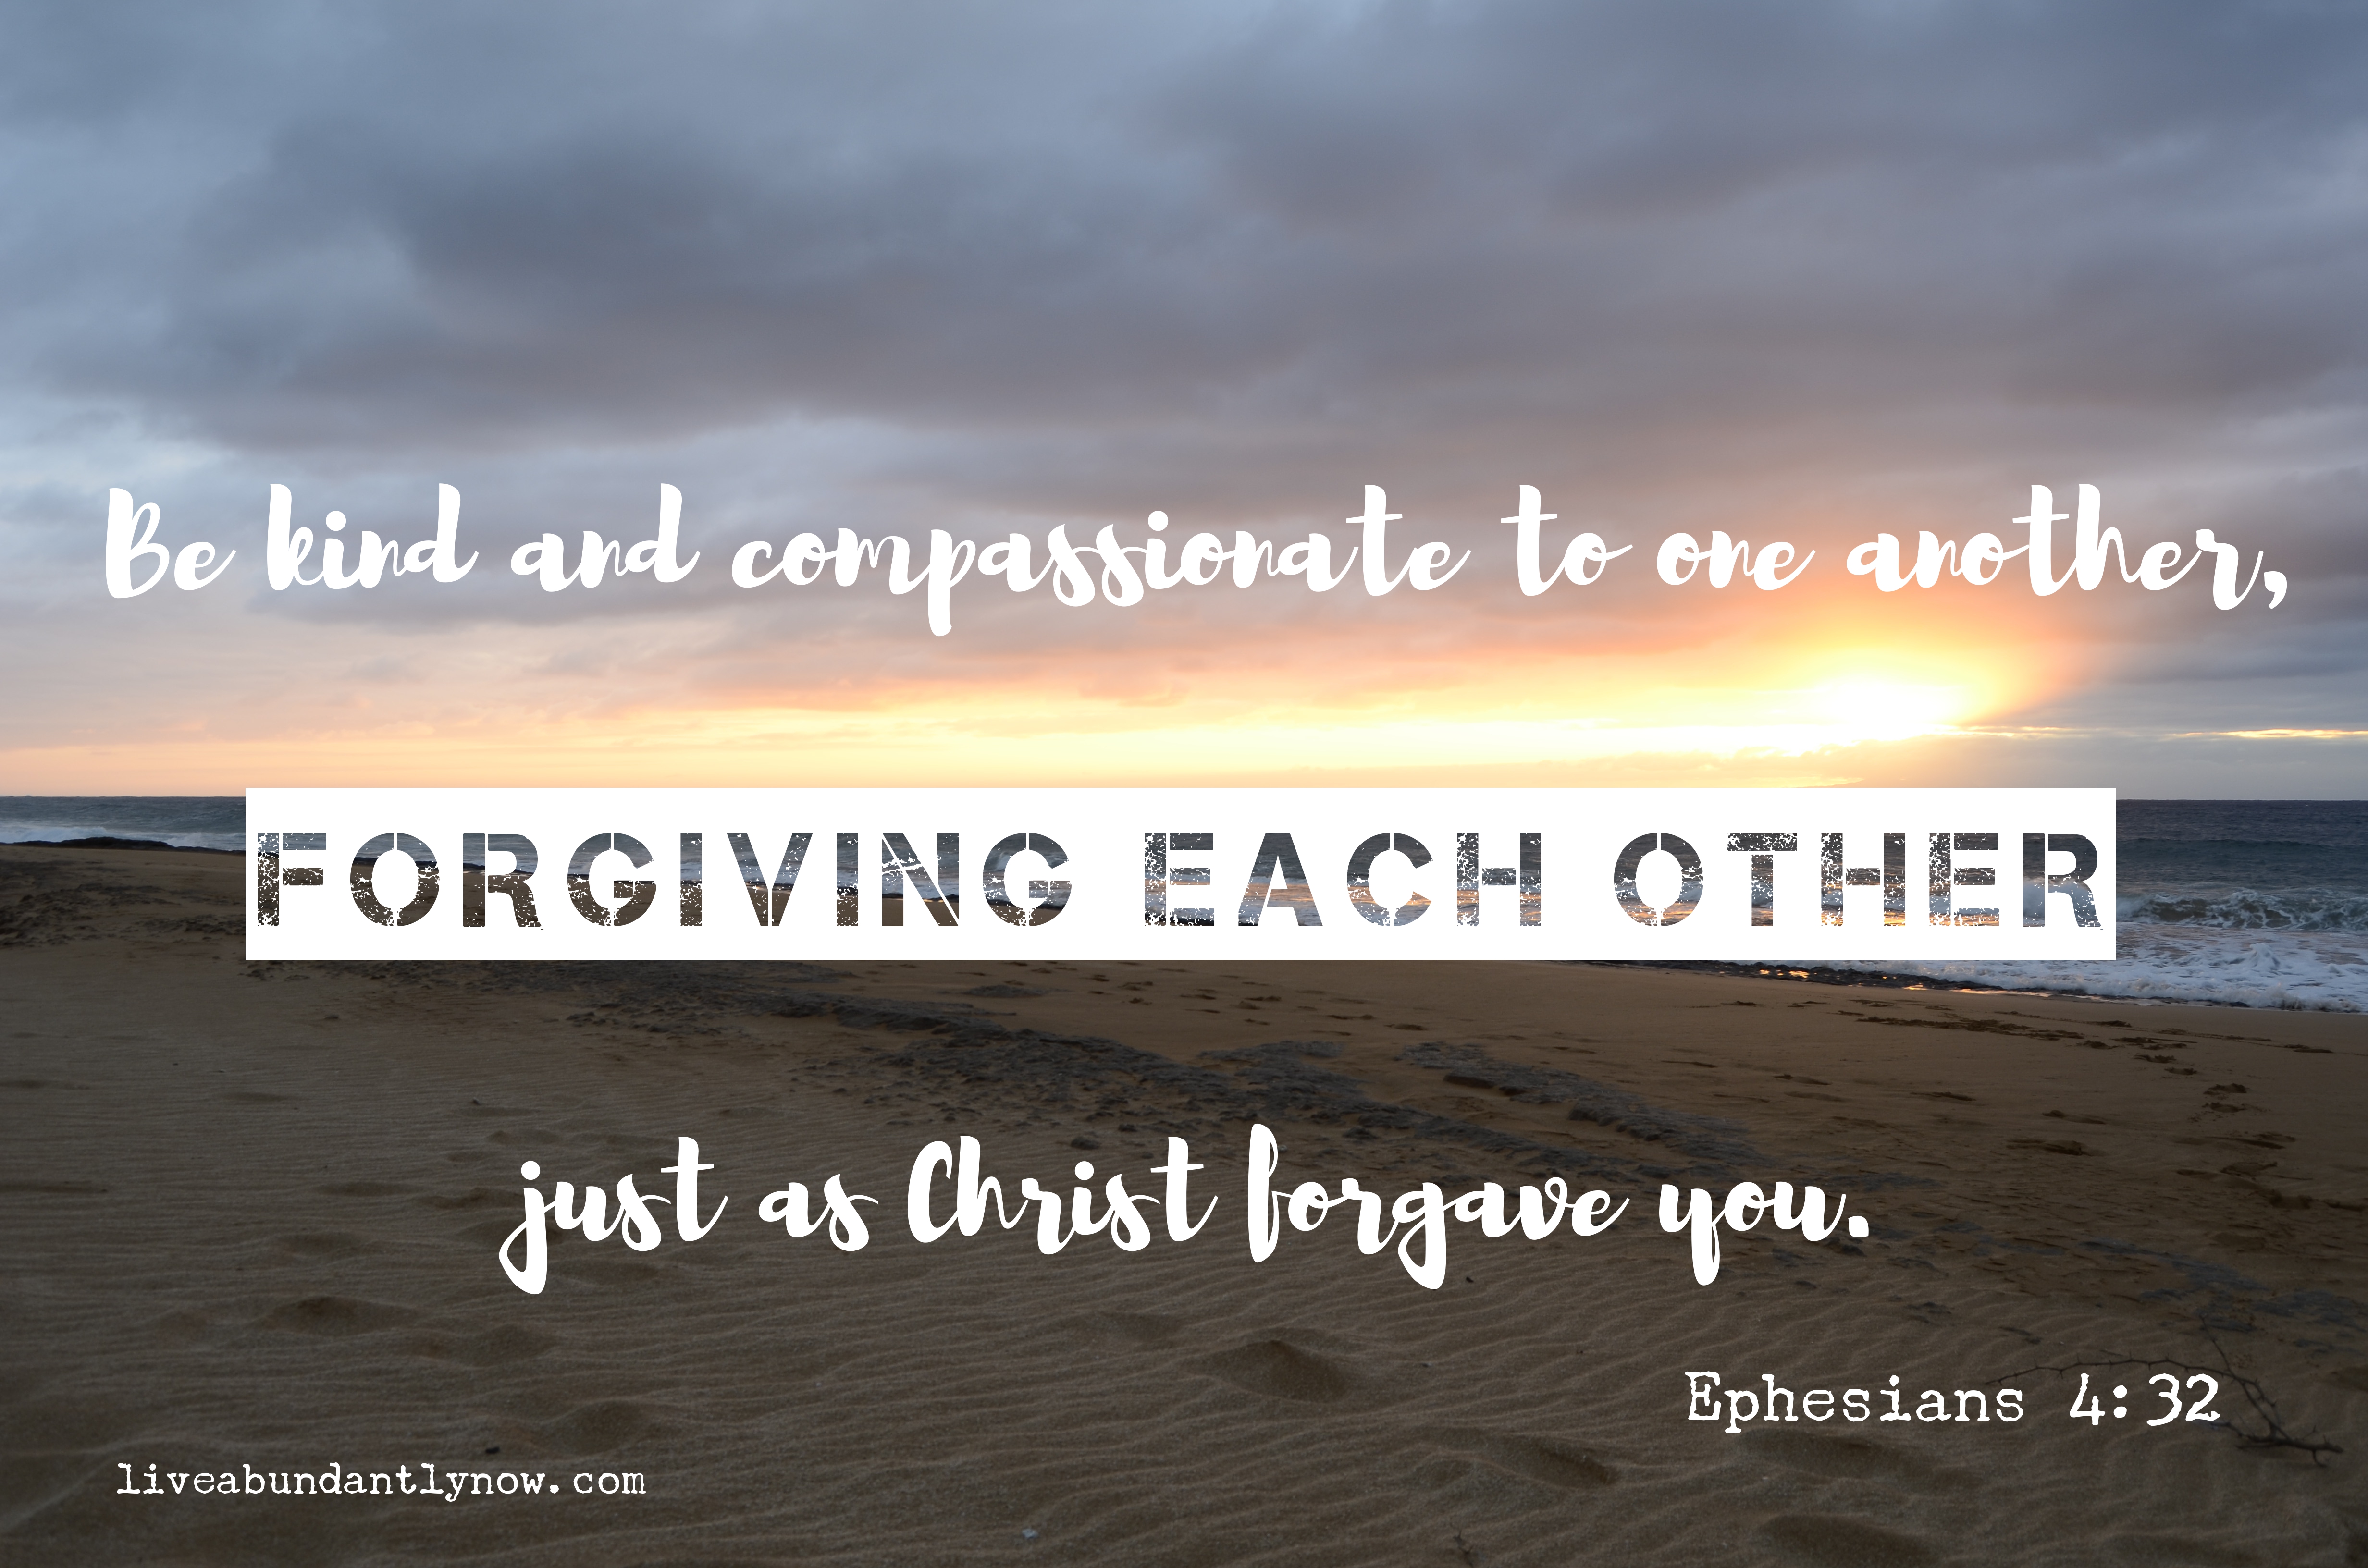 Forgive Each Other